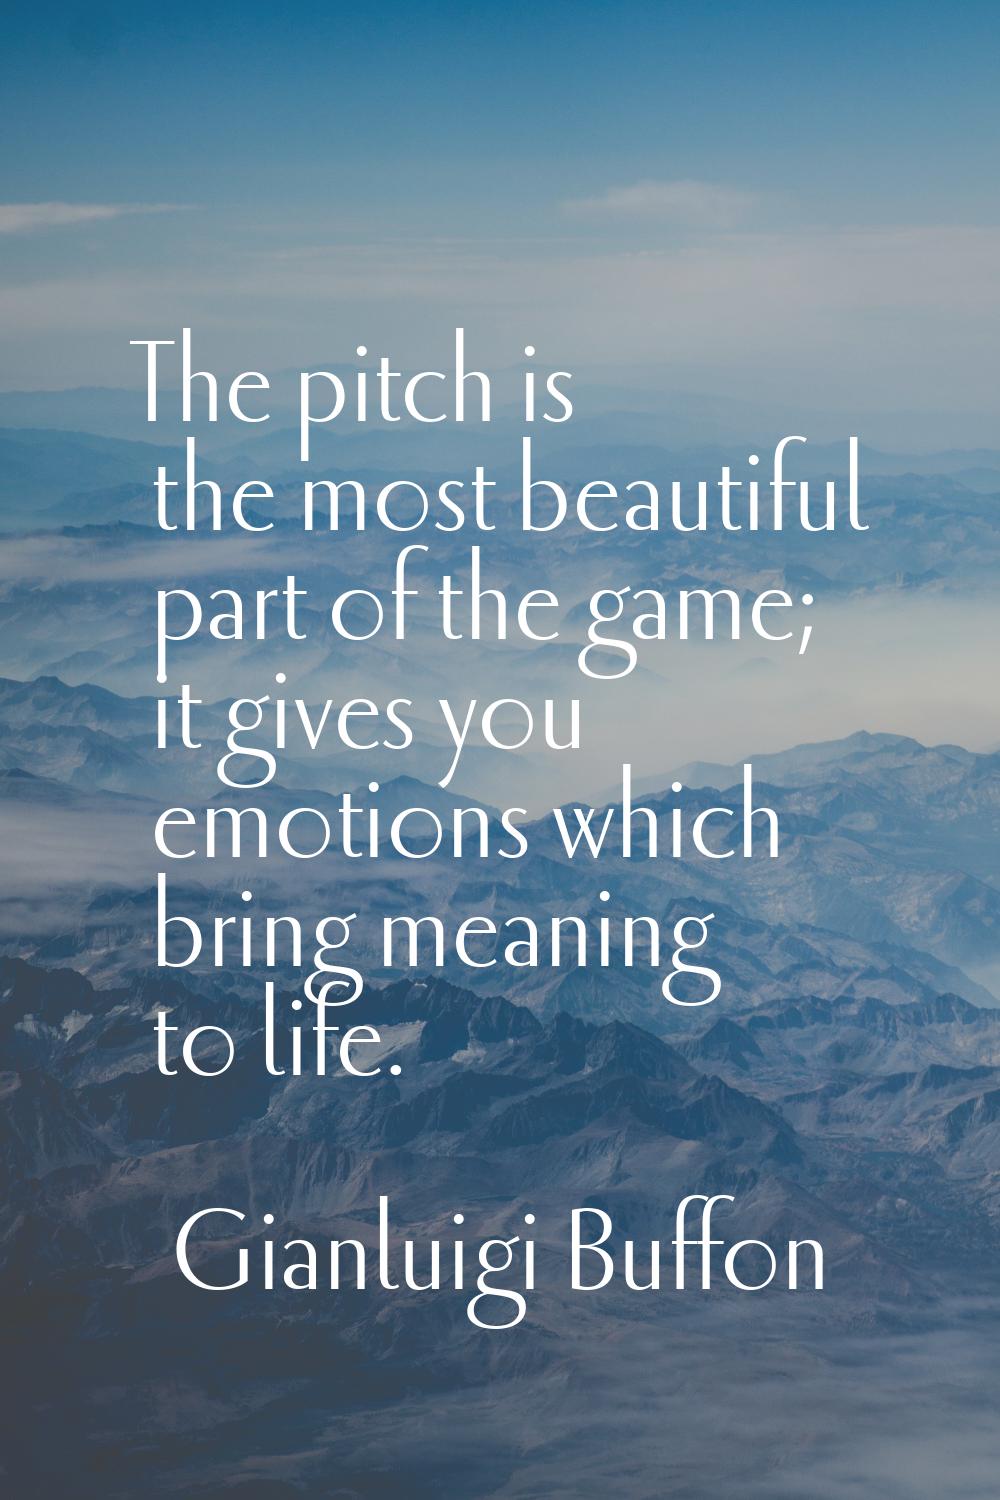 The pitch is the most beautiful part of the game; it gives you emotions which bring meaning to life